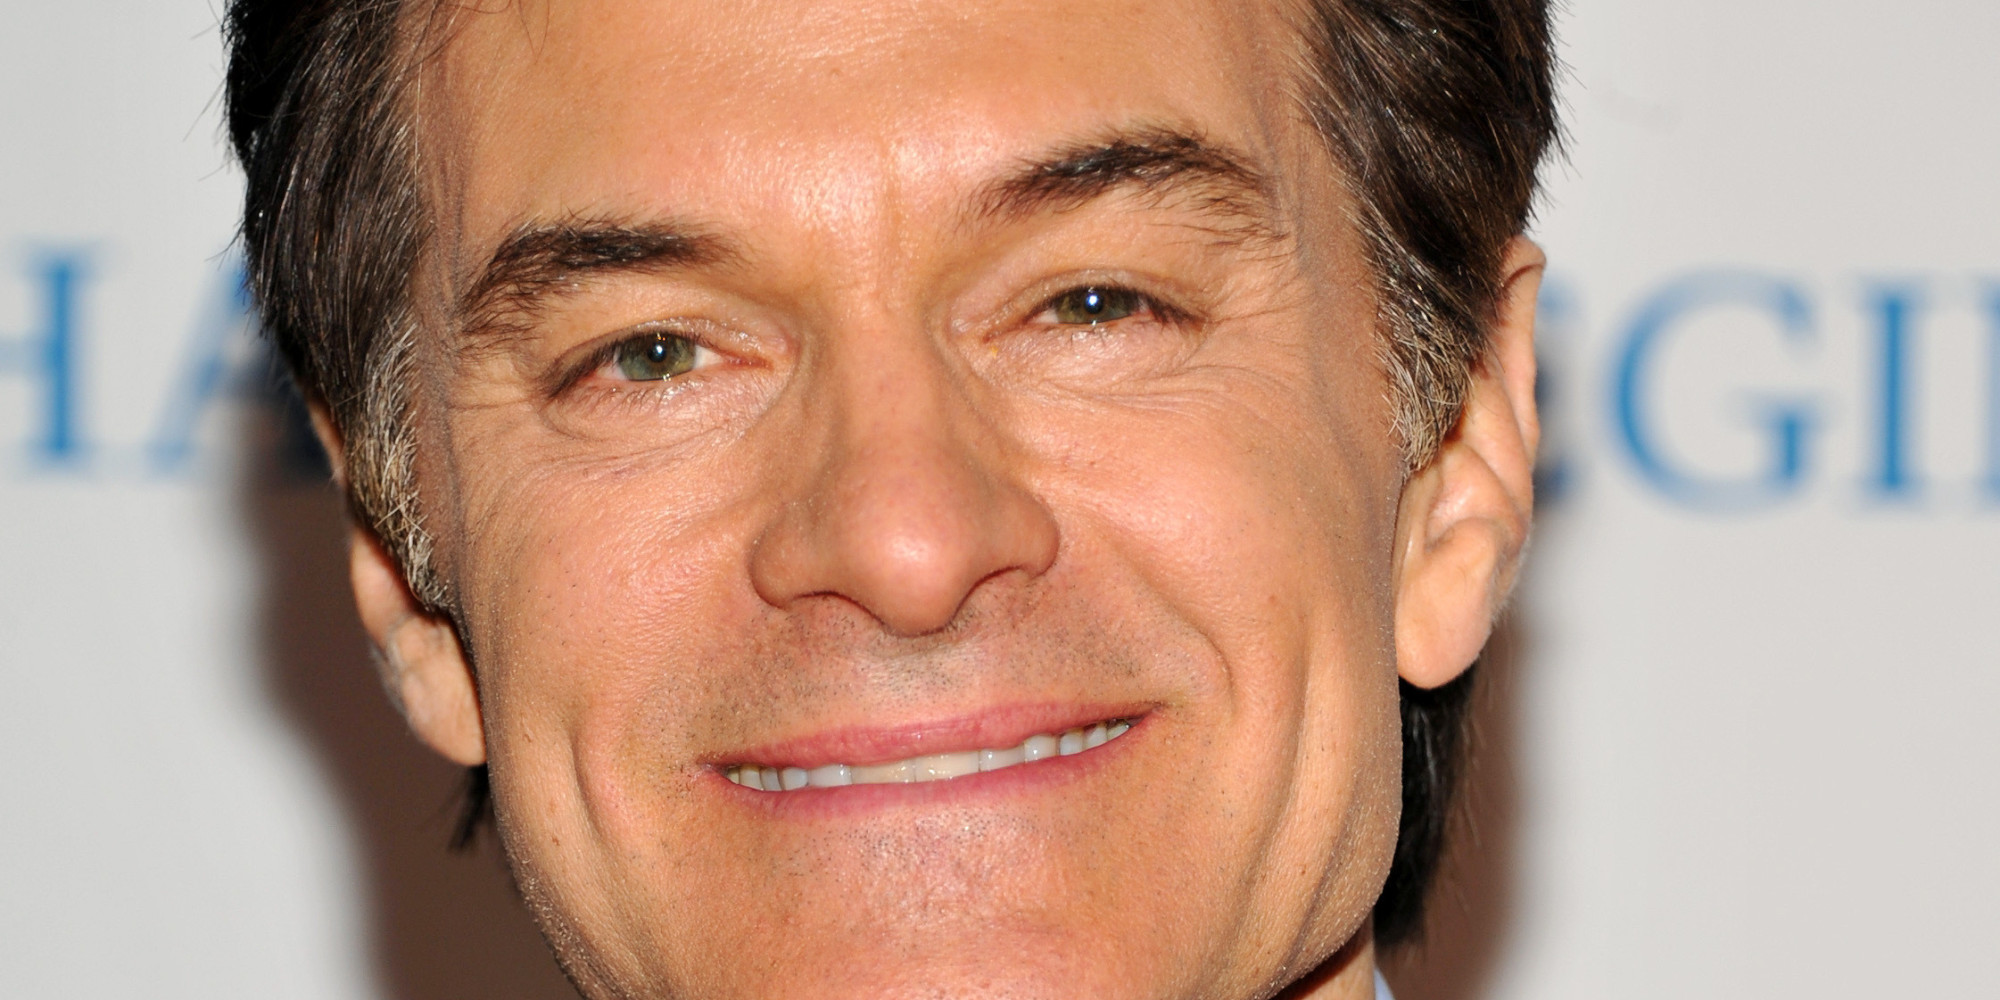 Dr Mehmet Oz Says He #39 ll Address Quackery Allegations On His Show